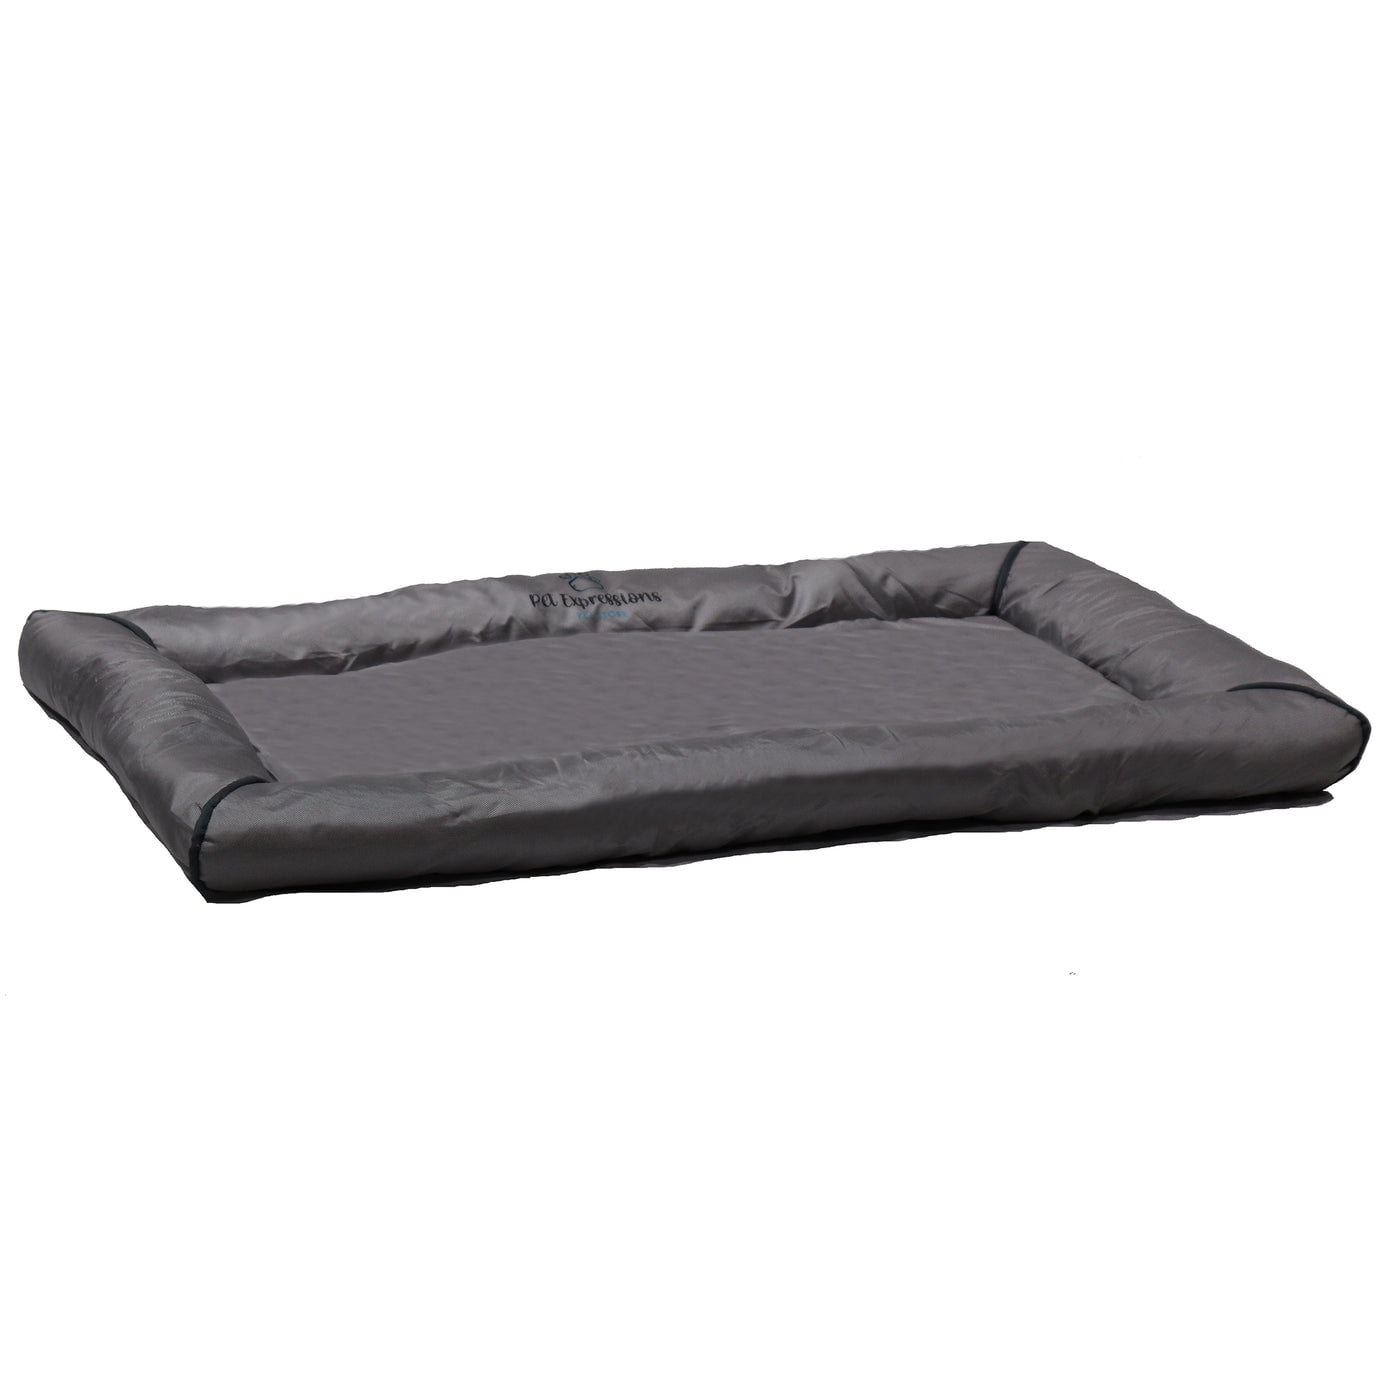  Allisandro Water-Proof Dog Bed, Washable Mat Crate